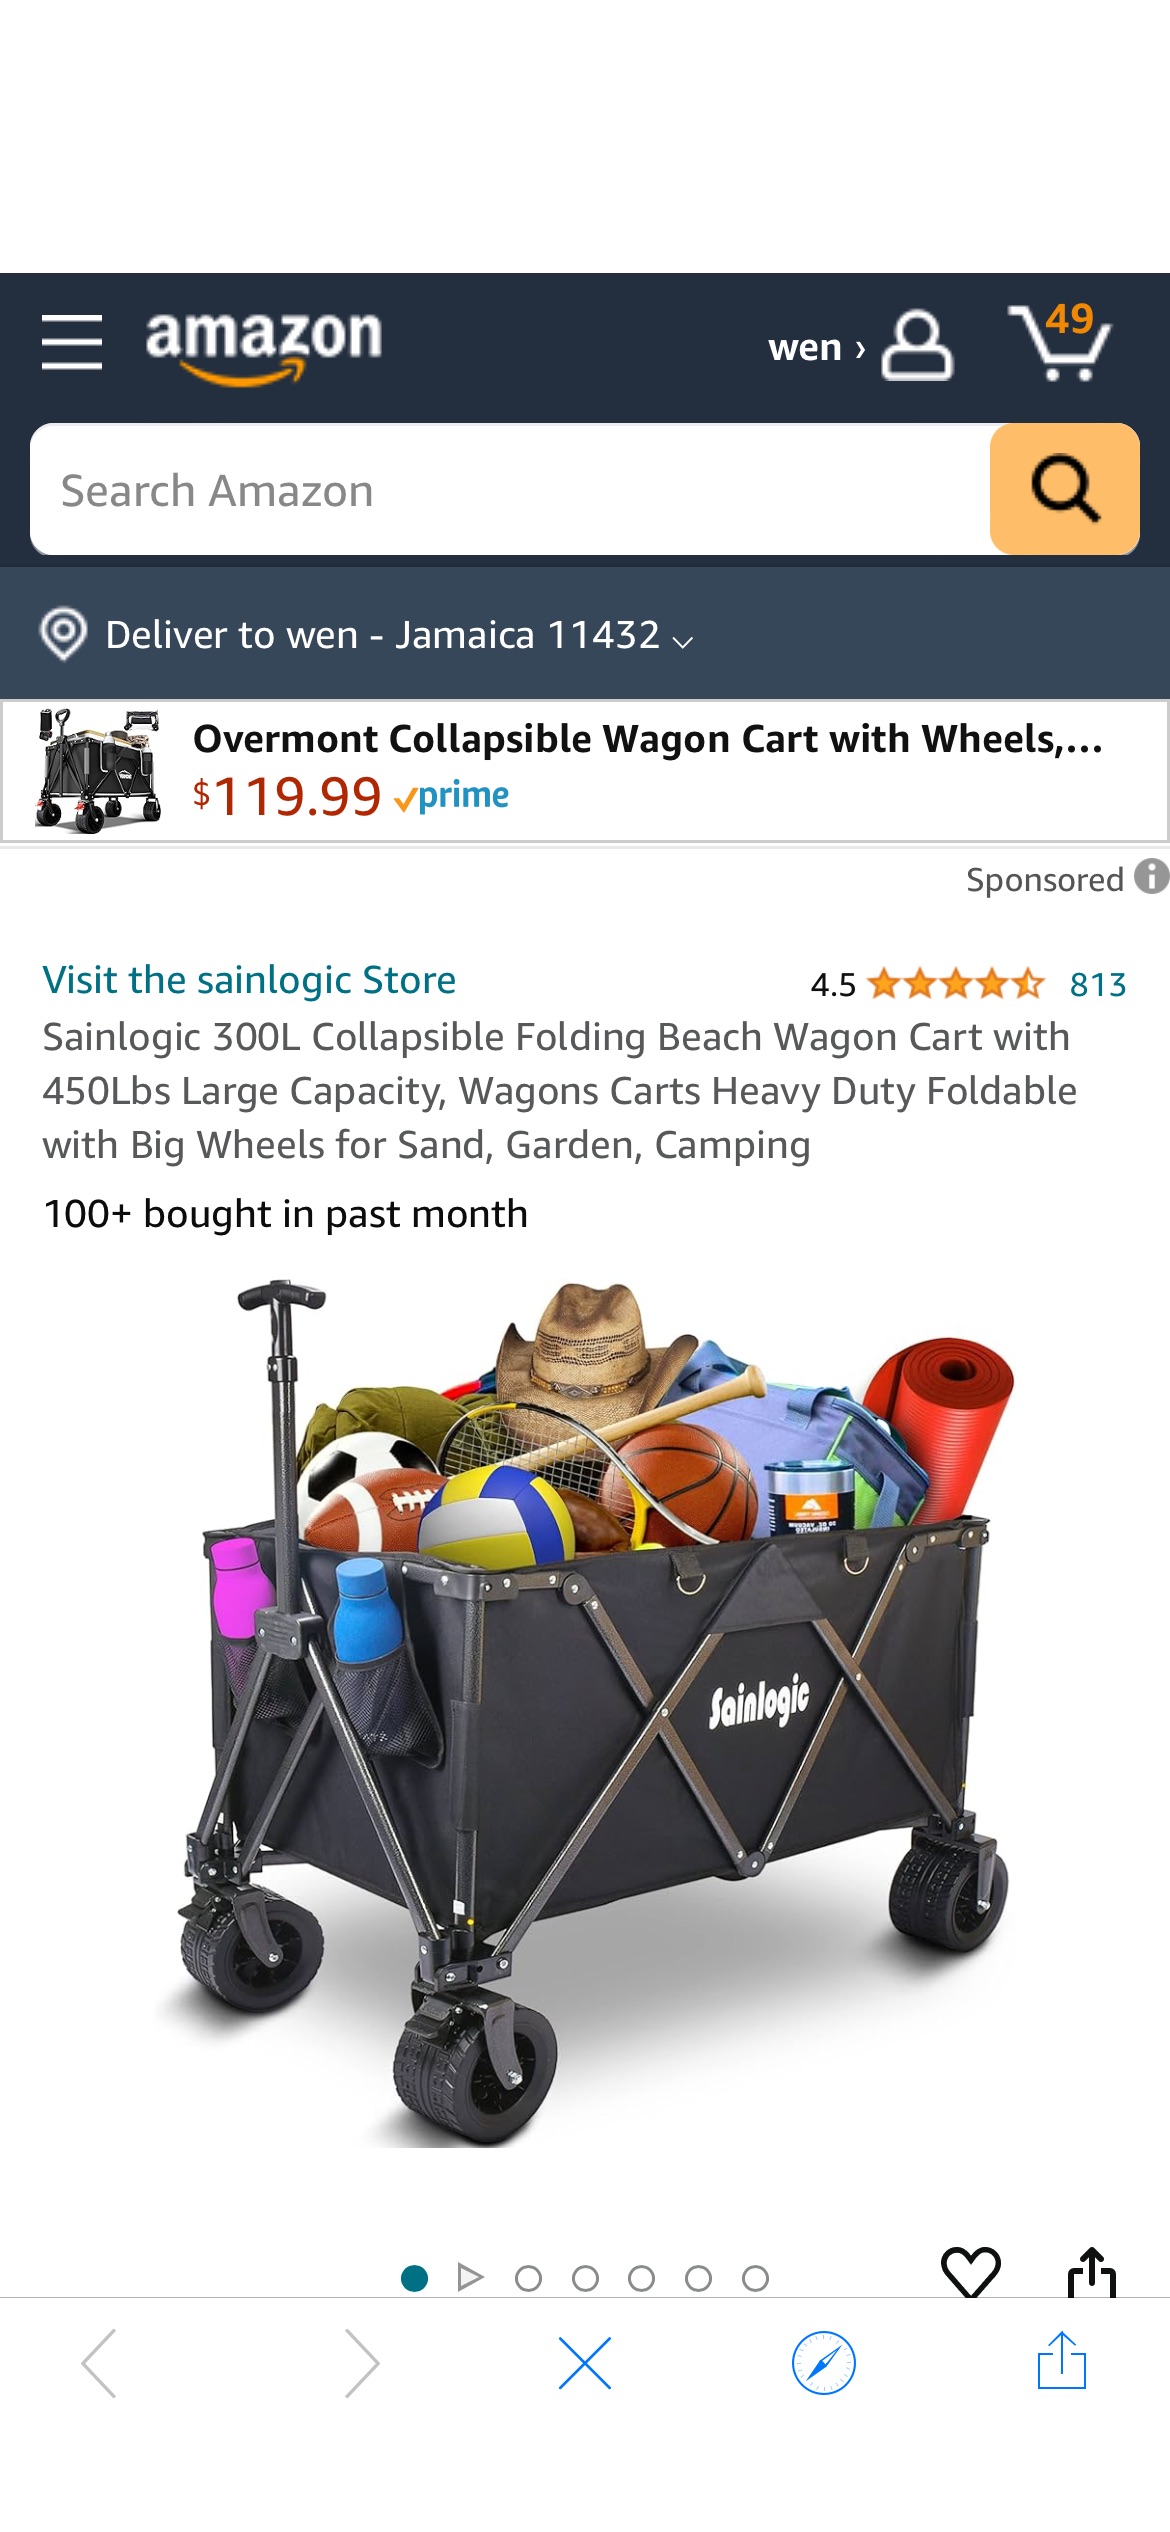 Amazon.com : Sainlogic 300L Collapsible Folding Beach Wagon Cart with 450Lbs Large Capacity, Wagons Carts Heavy Duty Foldable with Big Wheels for Sand, Garden, Camping : Patio, Lawn & Garden